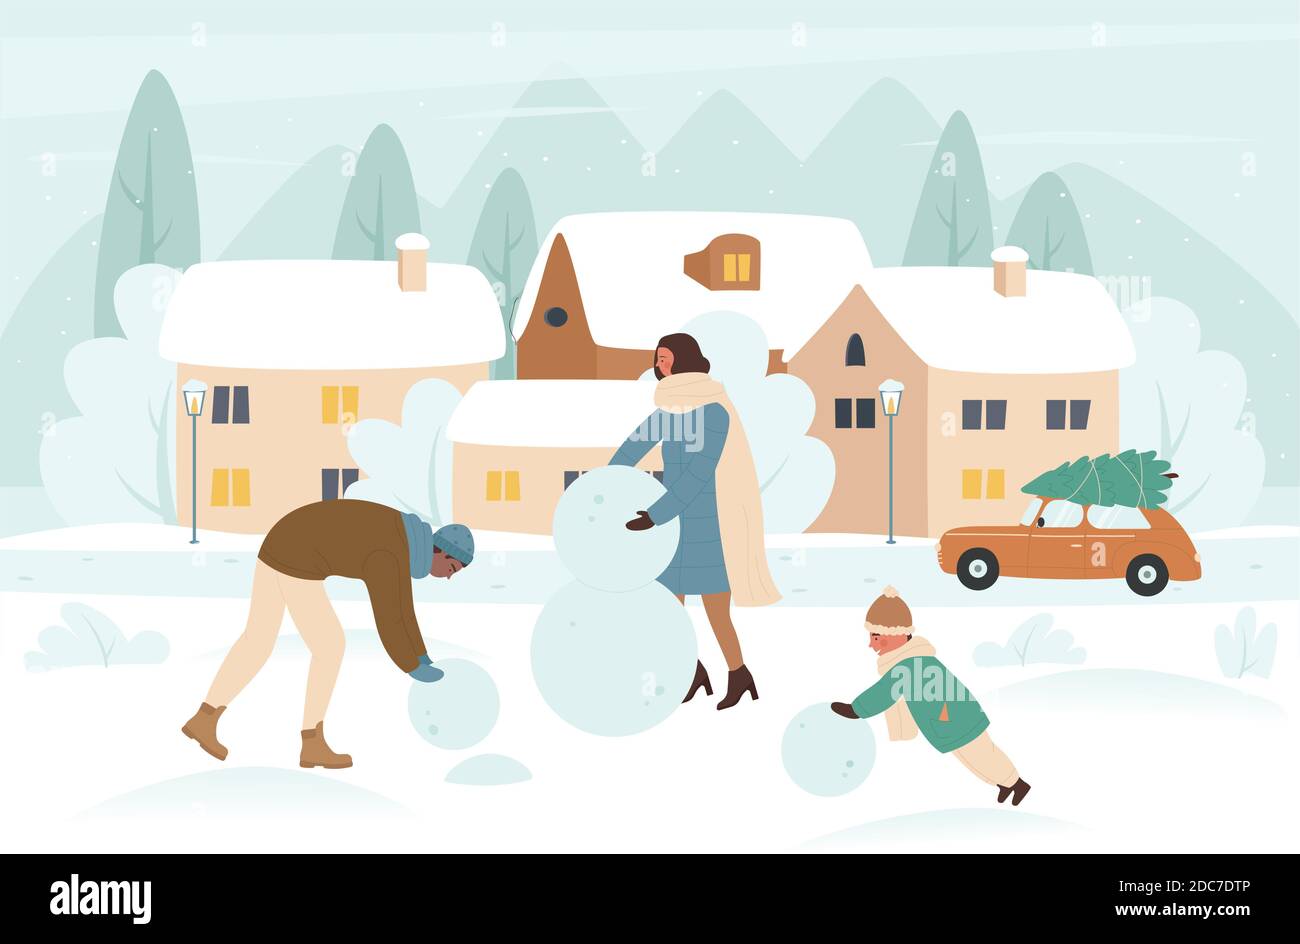 Family people making snowman in Christmas winter holiday vector illustration. Cartoon happy father mother and kid boy play together in snowy city park, make Xmas snowman with snow balls background Stock Vector